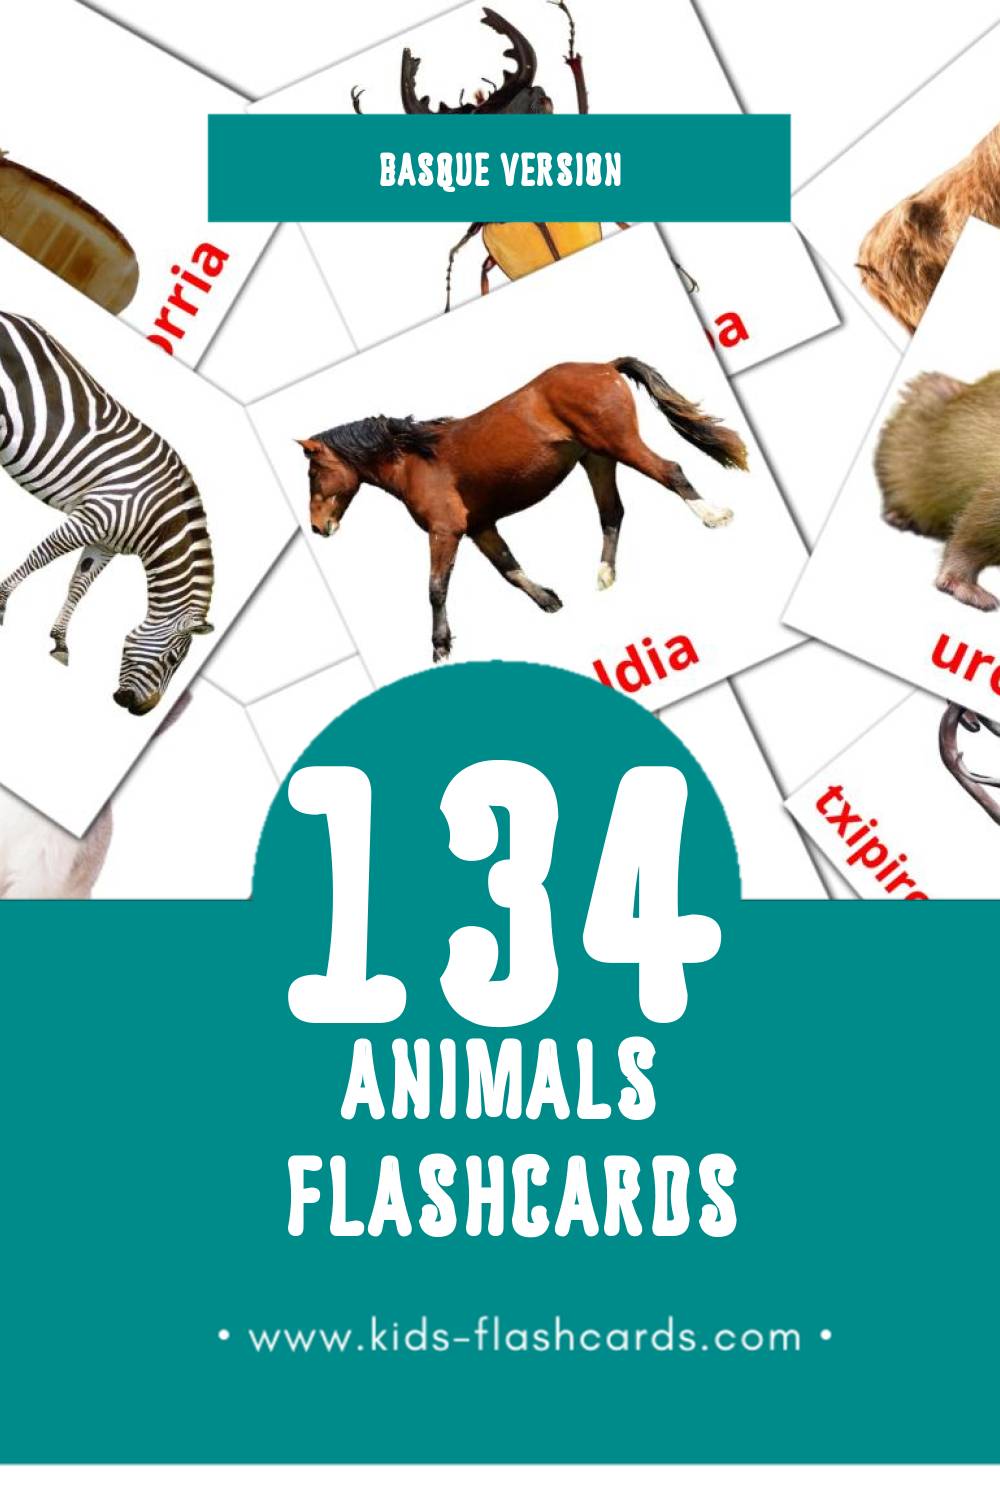 Visual Animaliak Flashcards for Toddlers (120 cards in Basque)